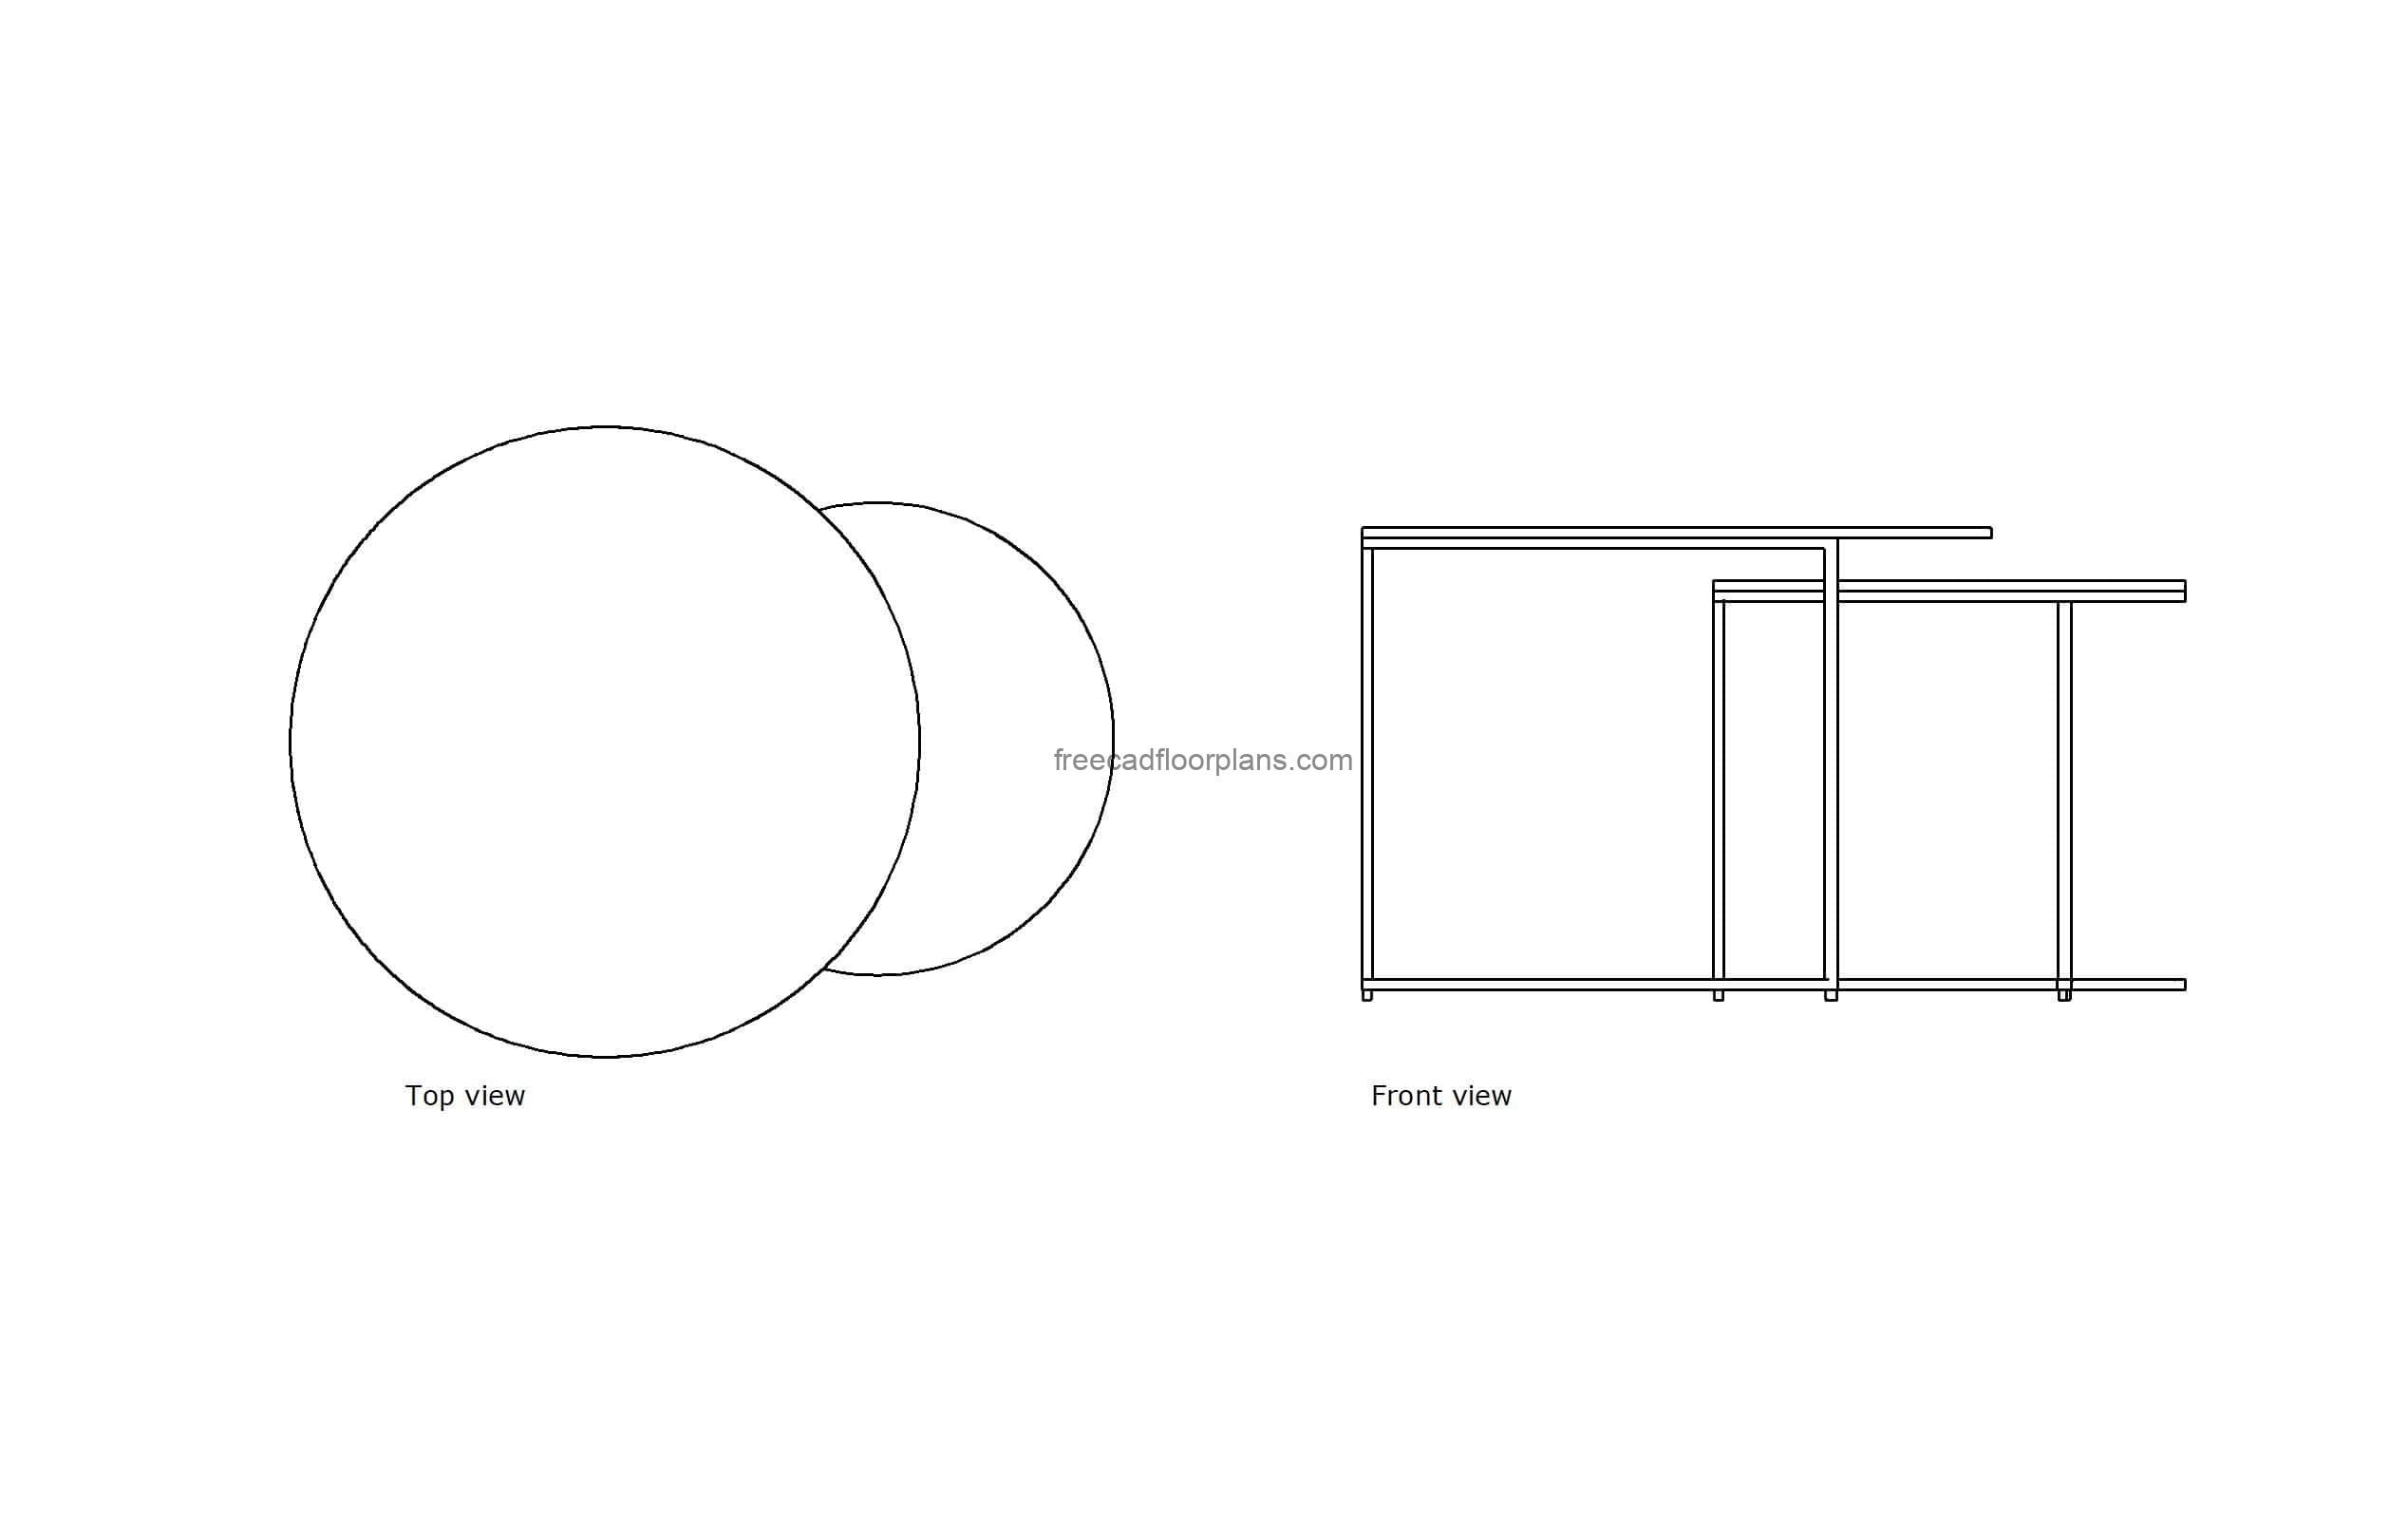 autocad drawing of a round coffee table, plan and elevation 2d views, dwg file free for download